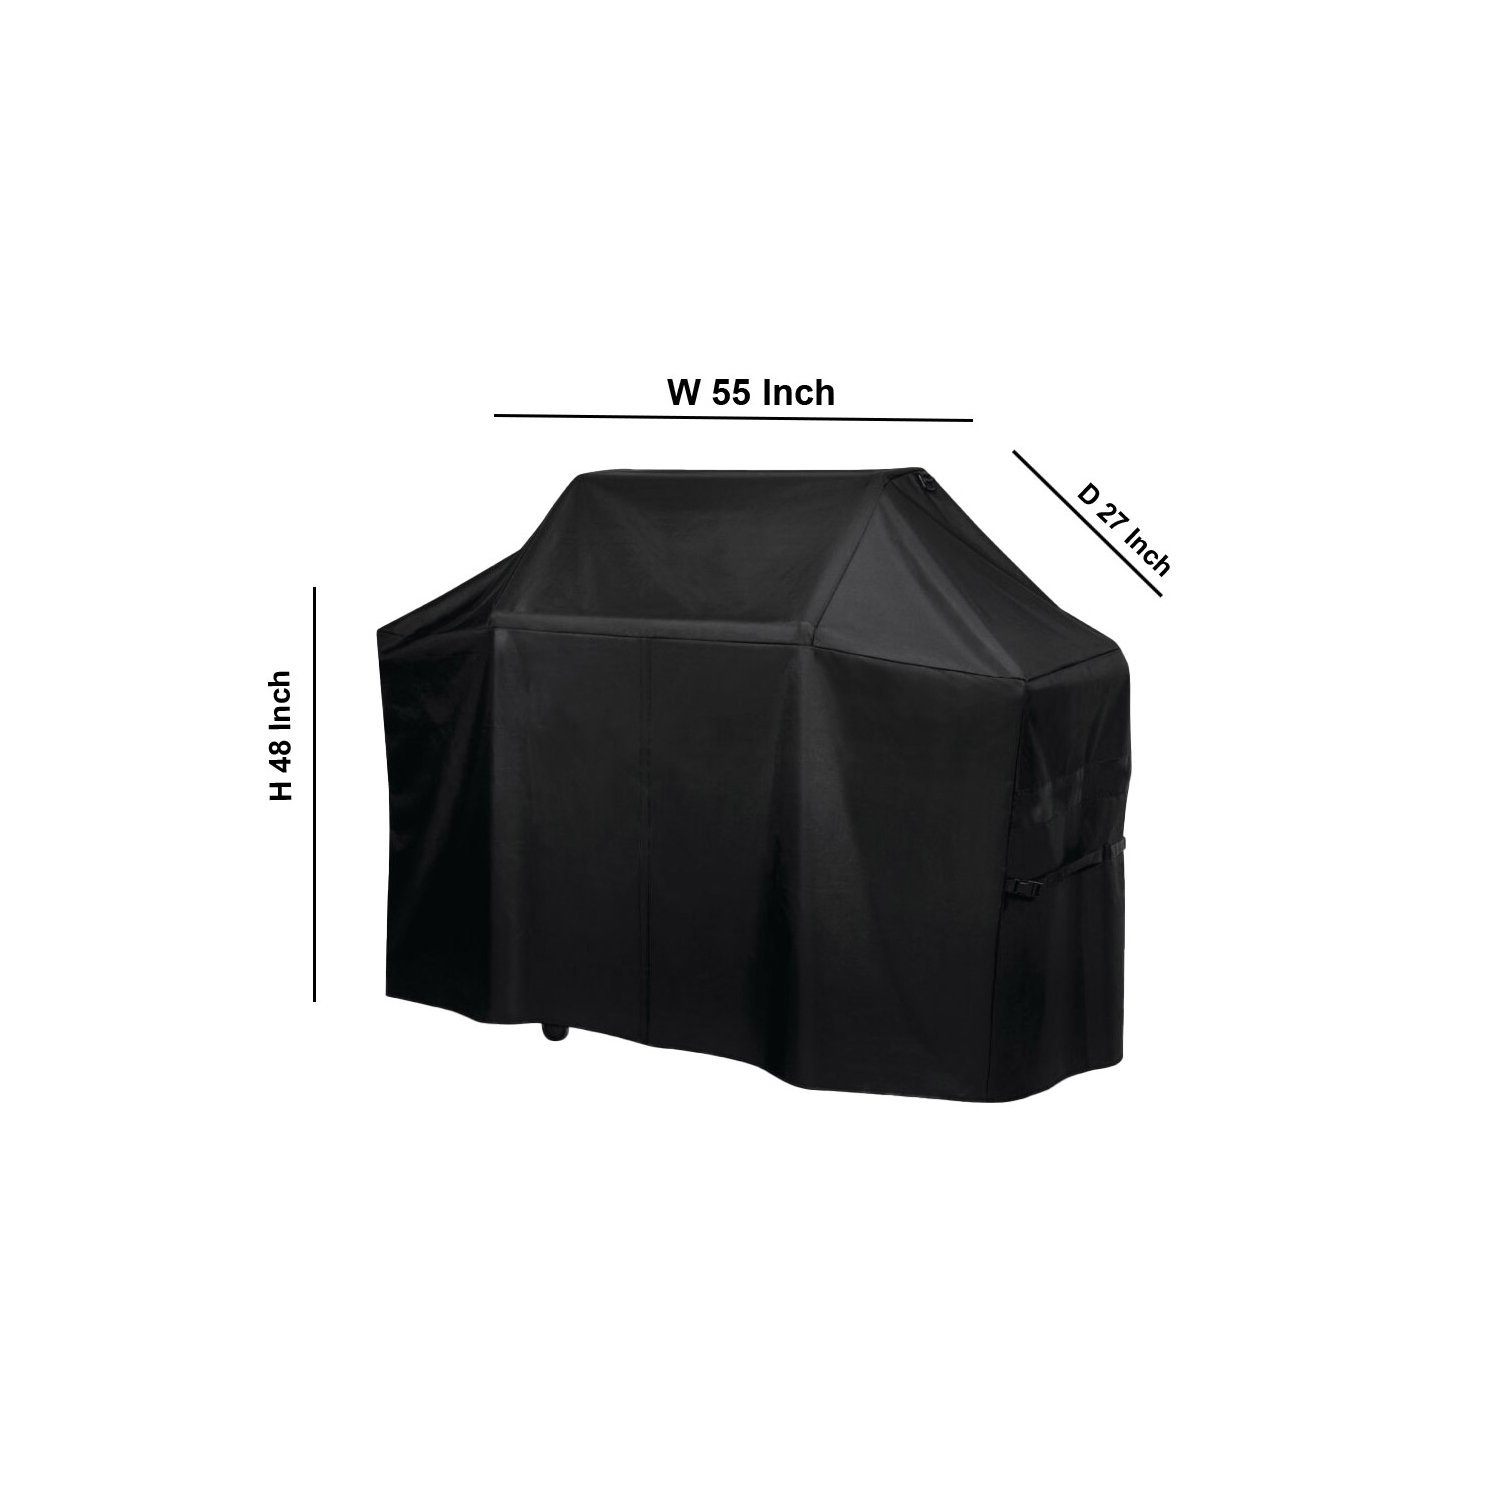 Kikcoin Grill Cover Black 600D Oxford Fabric Barbecue Gas Grill Cover Resistant to Rip and Fade with Air Vents & Adjustable Buckles 55 inch BBQ Grill Covers Heavy Duty Waterproof 